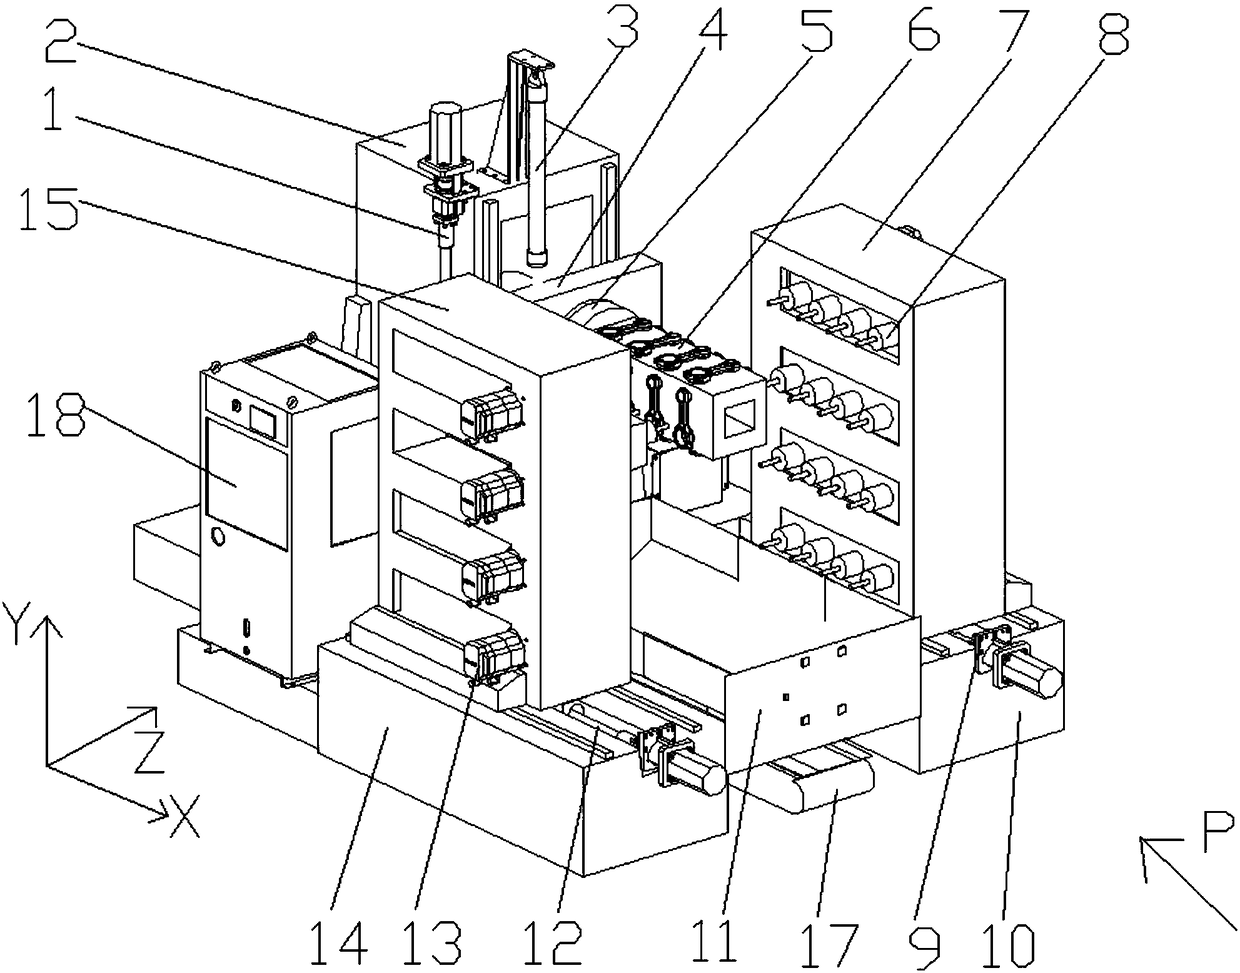 A multi-spindle multi-station connecting rod flexible processing equipment